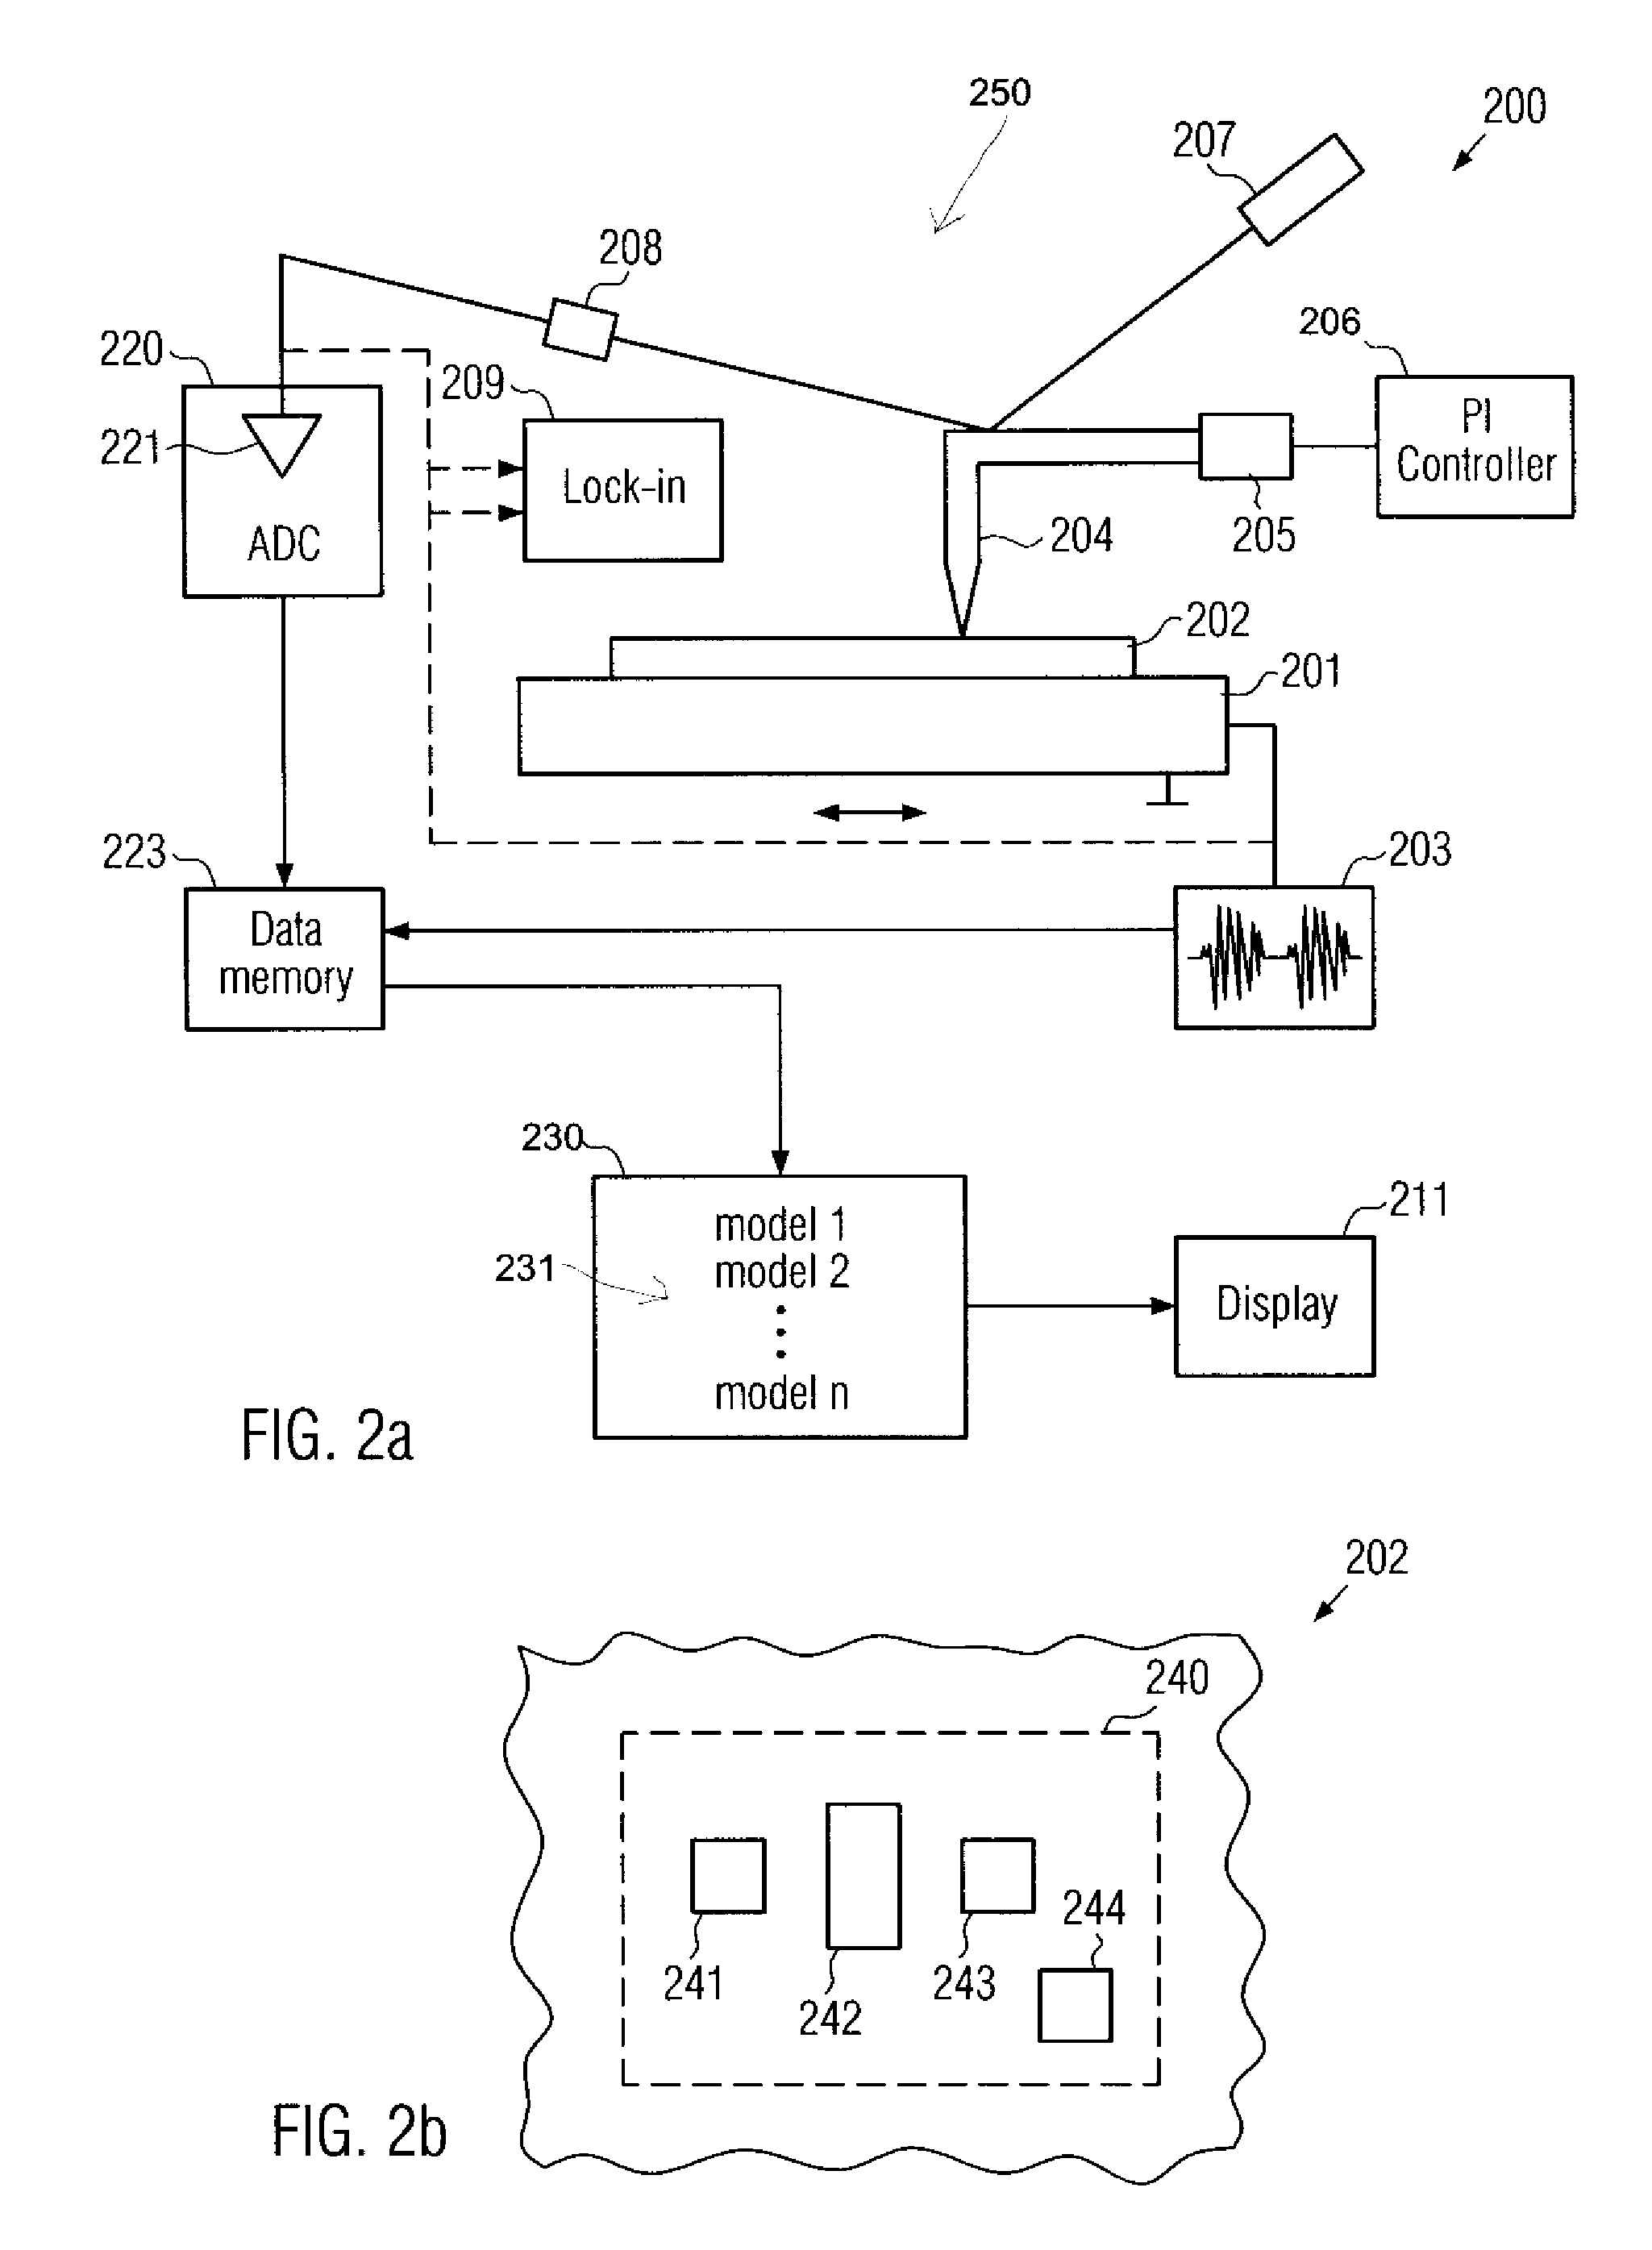 Method and apparatus for determining surface characteristics by using spm techniques with acoustic excitation and real-time digitizing